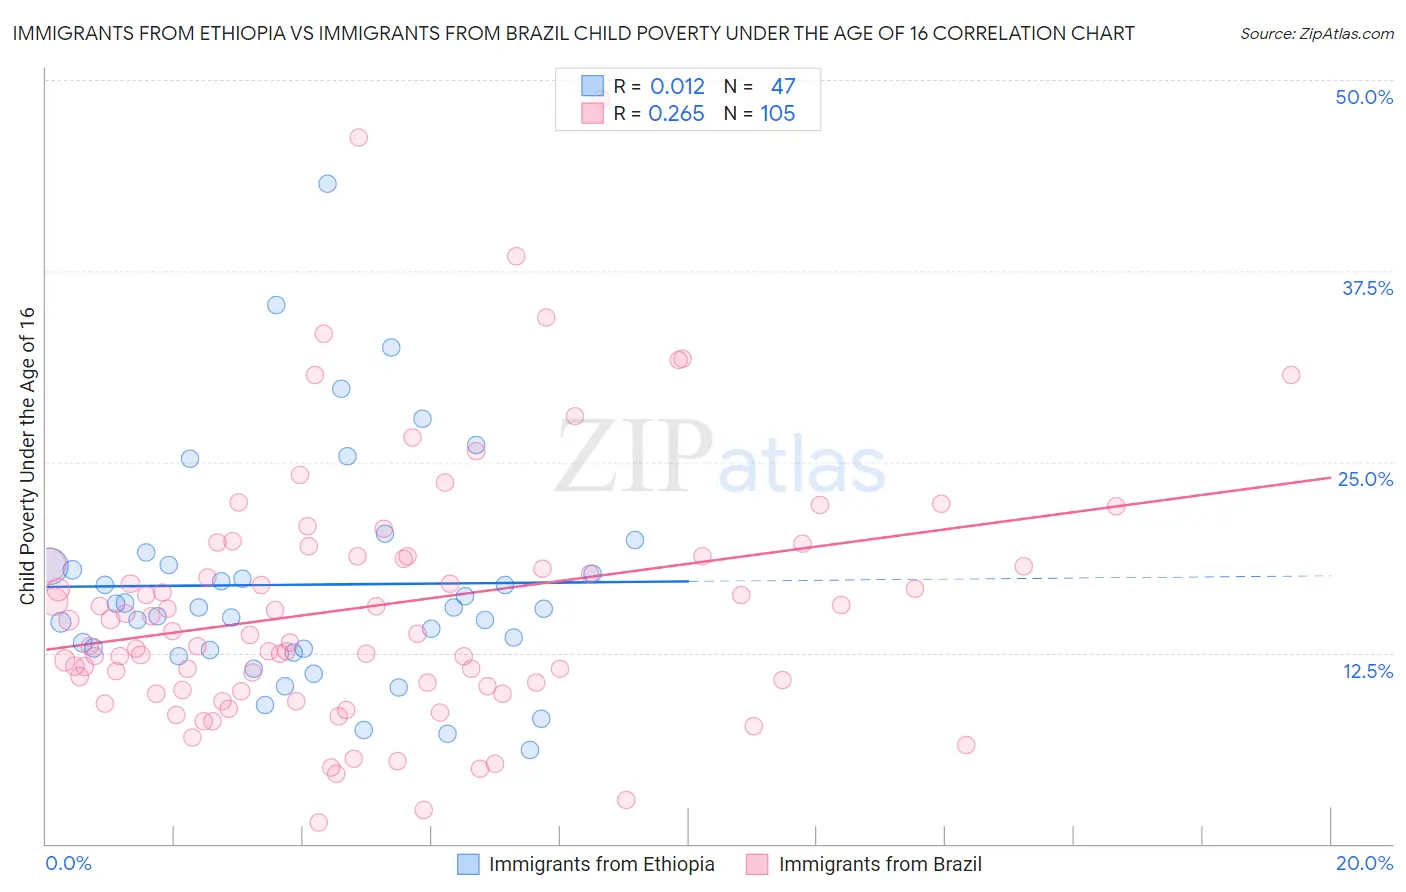 Immigrants from Ethiopia vs Immigrants from Brazil Child Poverty Under the Age of 16